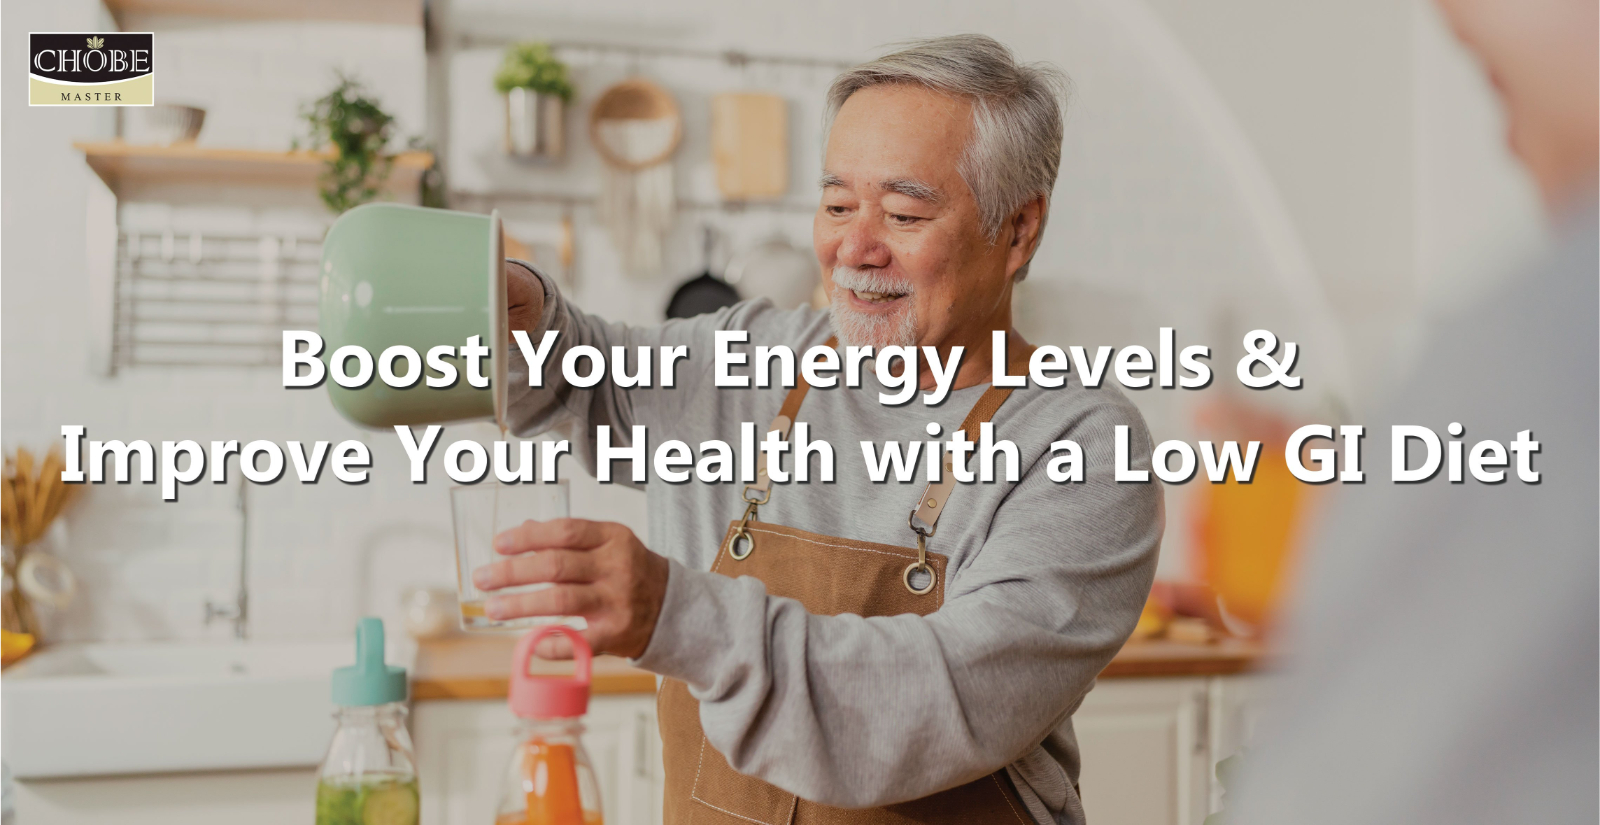 Boost Your Energy Levels and Improve Your Health with a Low GI Diet